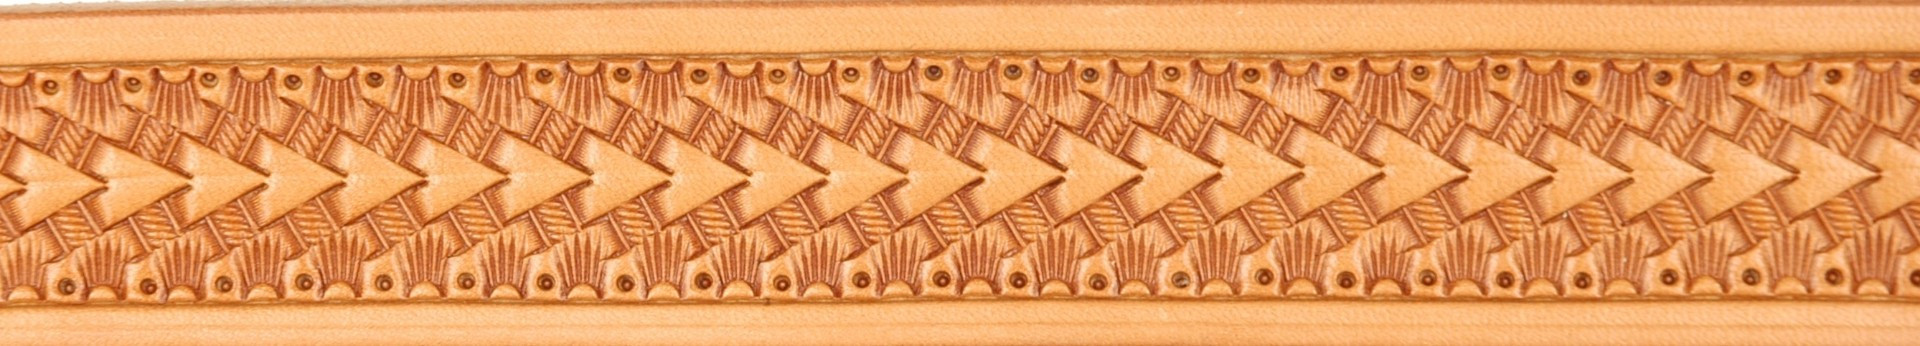 Lone Tree Leather Works  Tooling Patterns for Traditional Hand